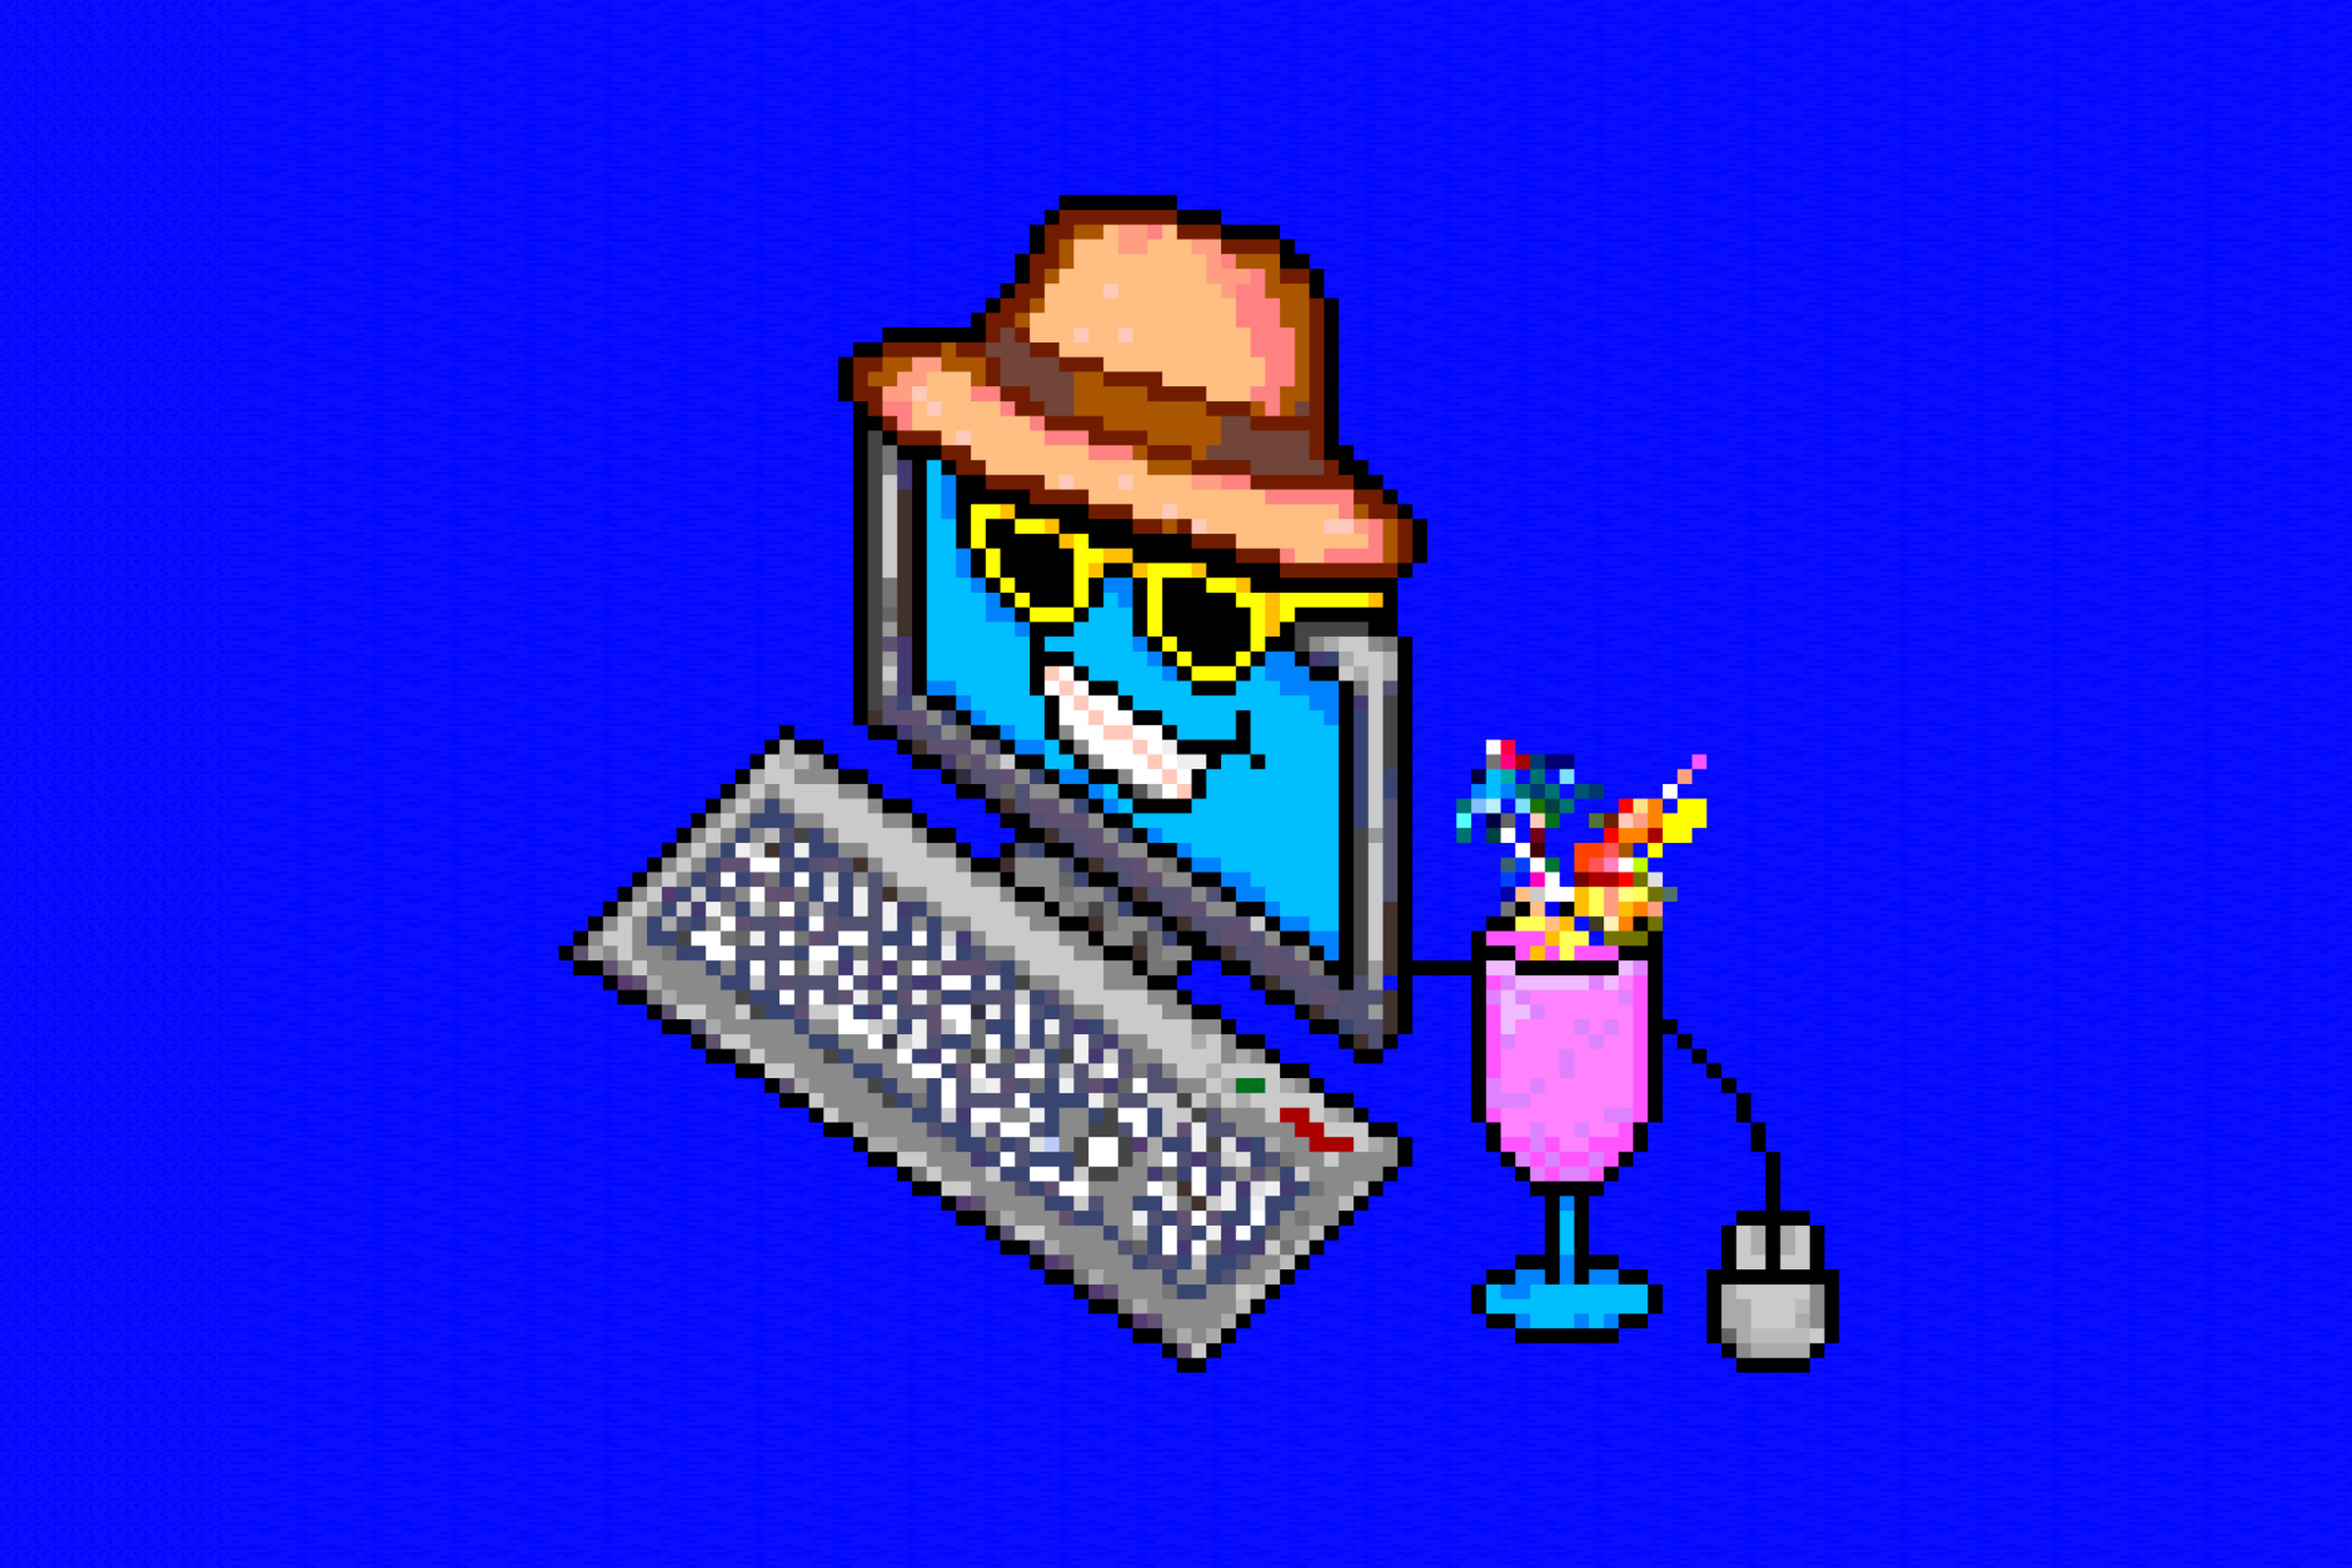 Illustration of a computer on vacation.